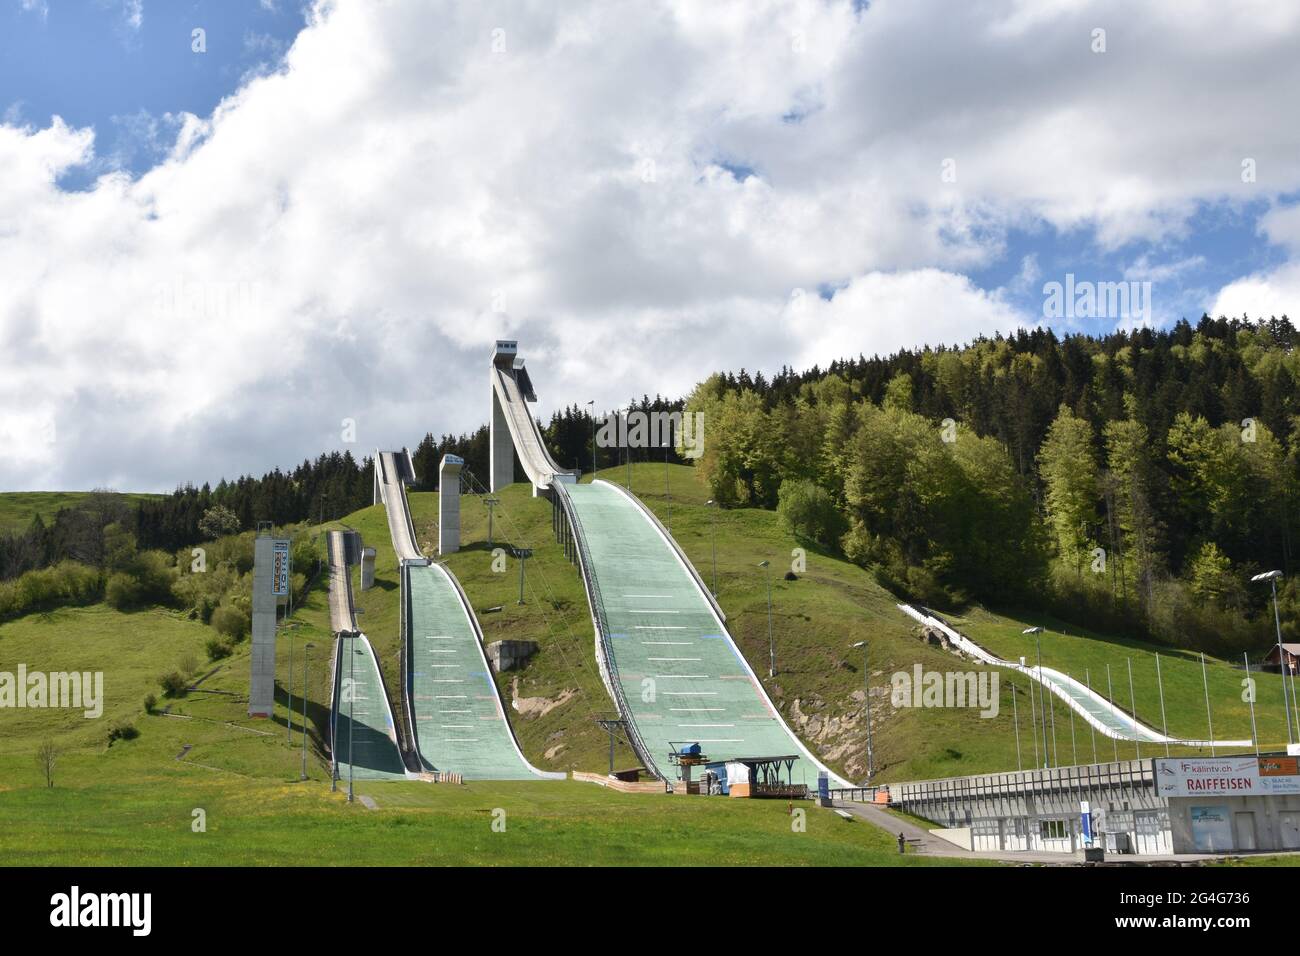 National Ski jumping venue of Switzerland in Eschbach, Einsiedeln surrounded by green forest under blue sky during summer time. Stock Photo